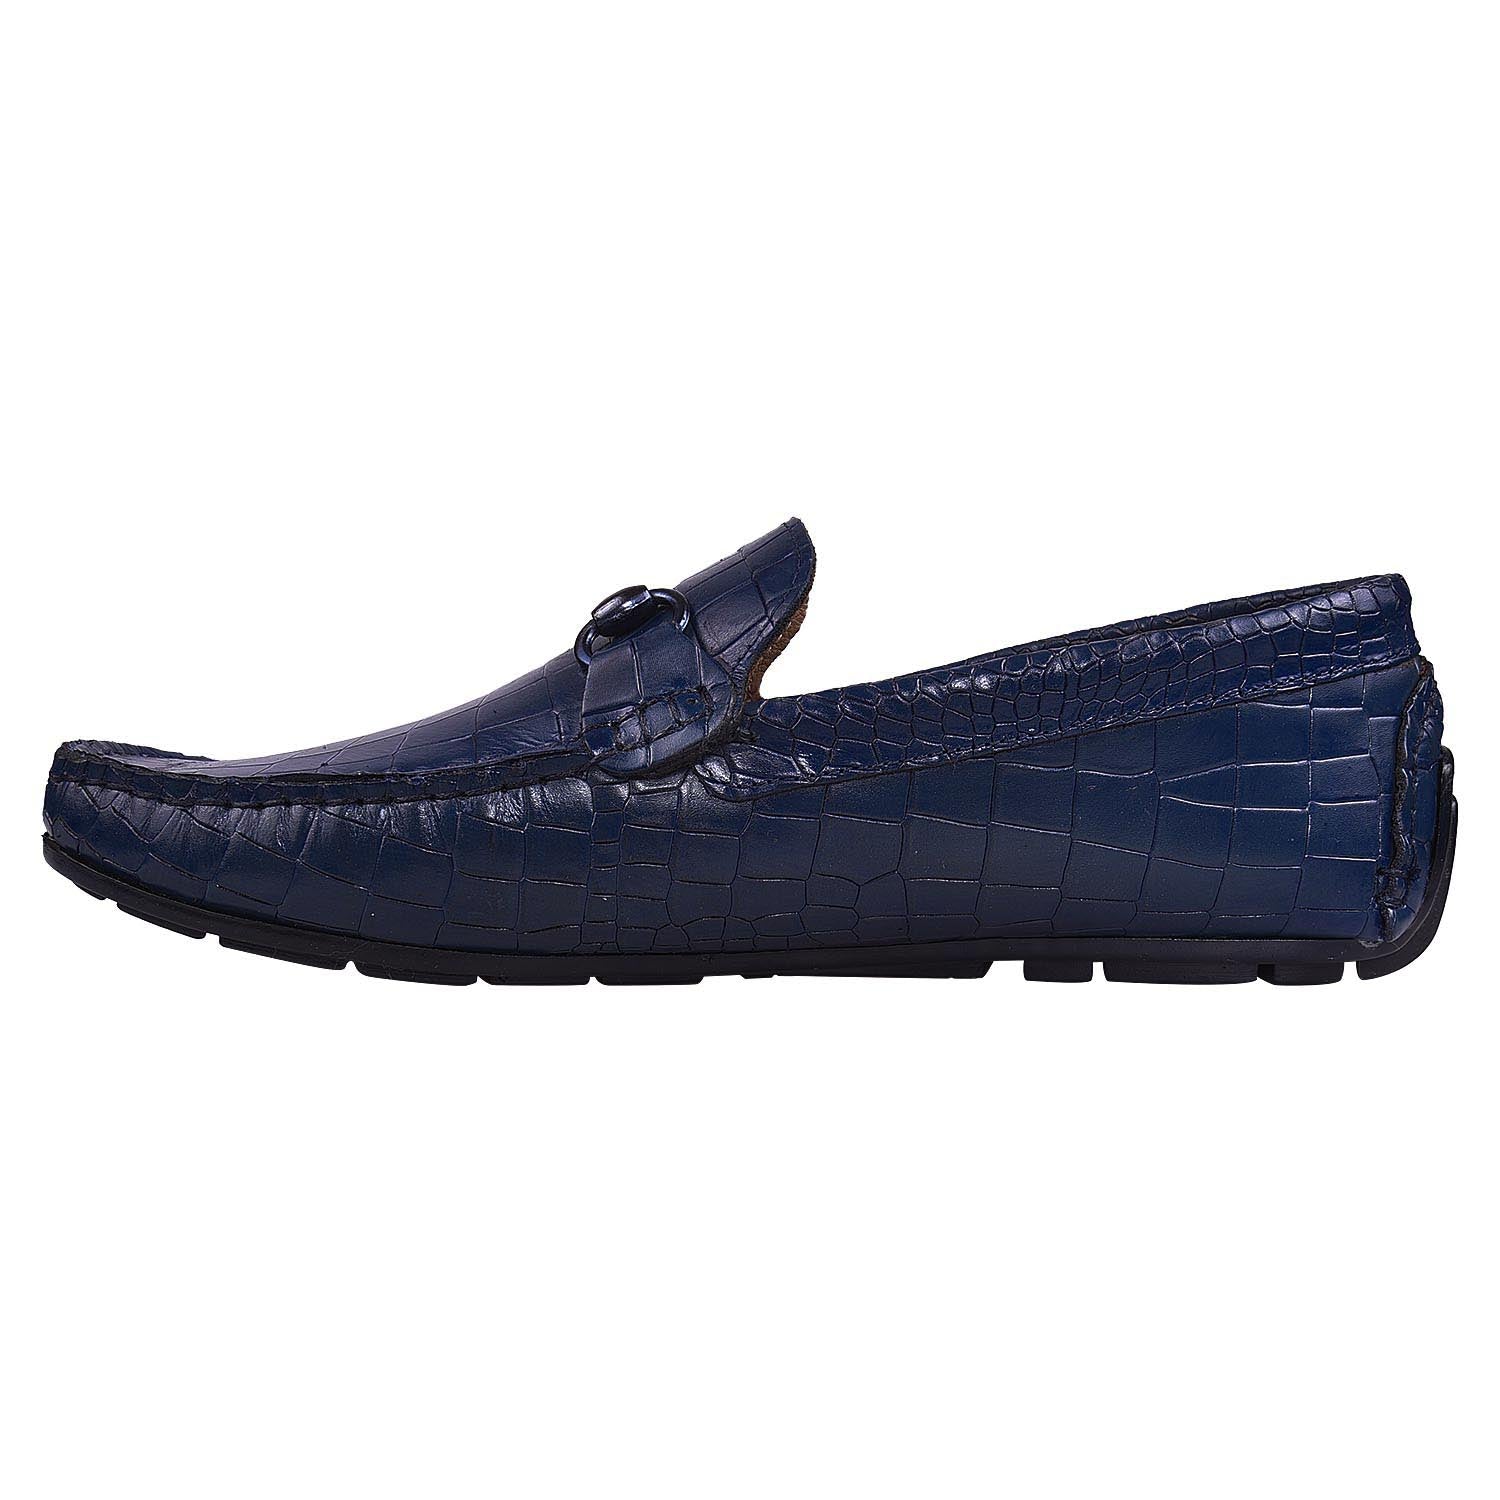 leather loafers for men